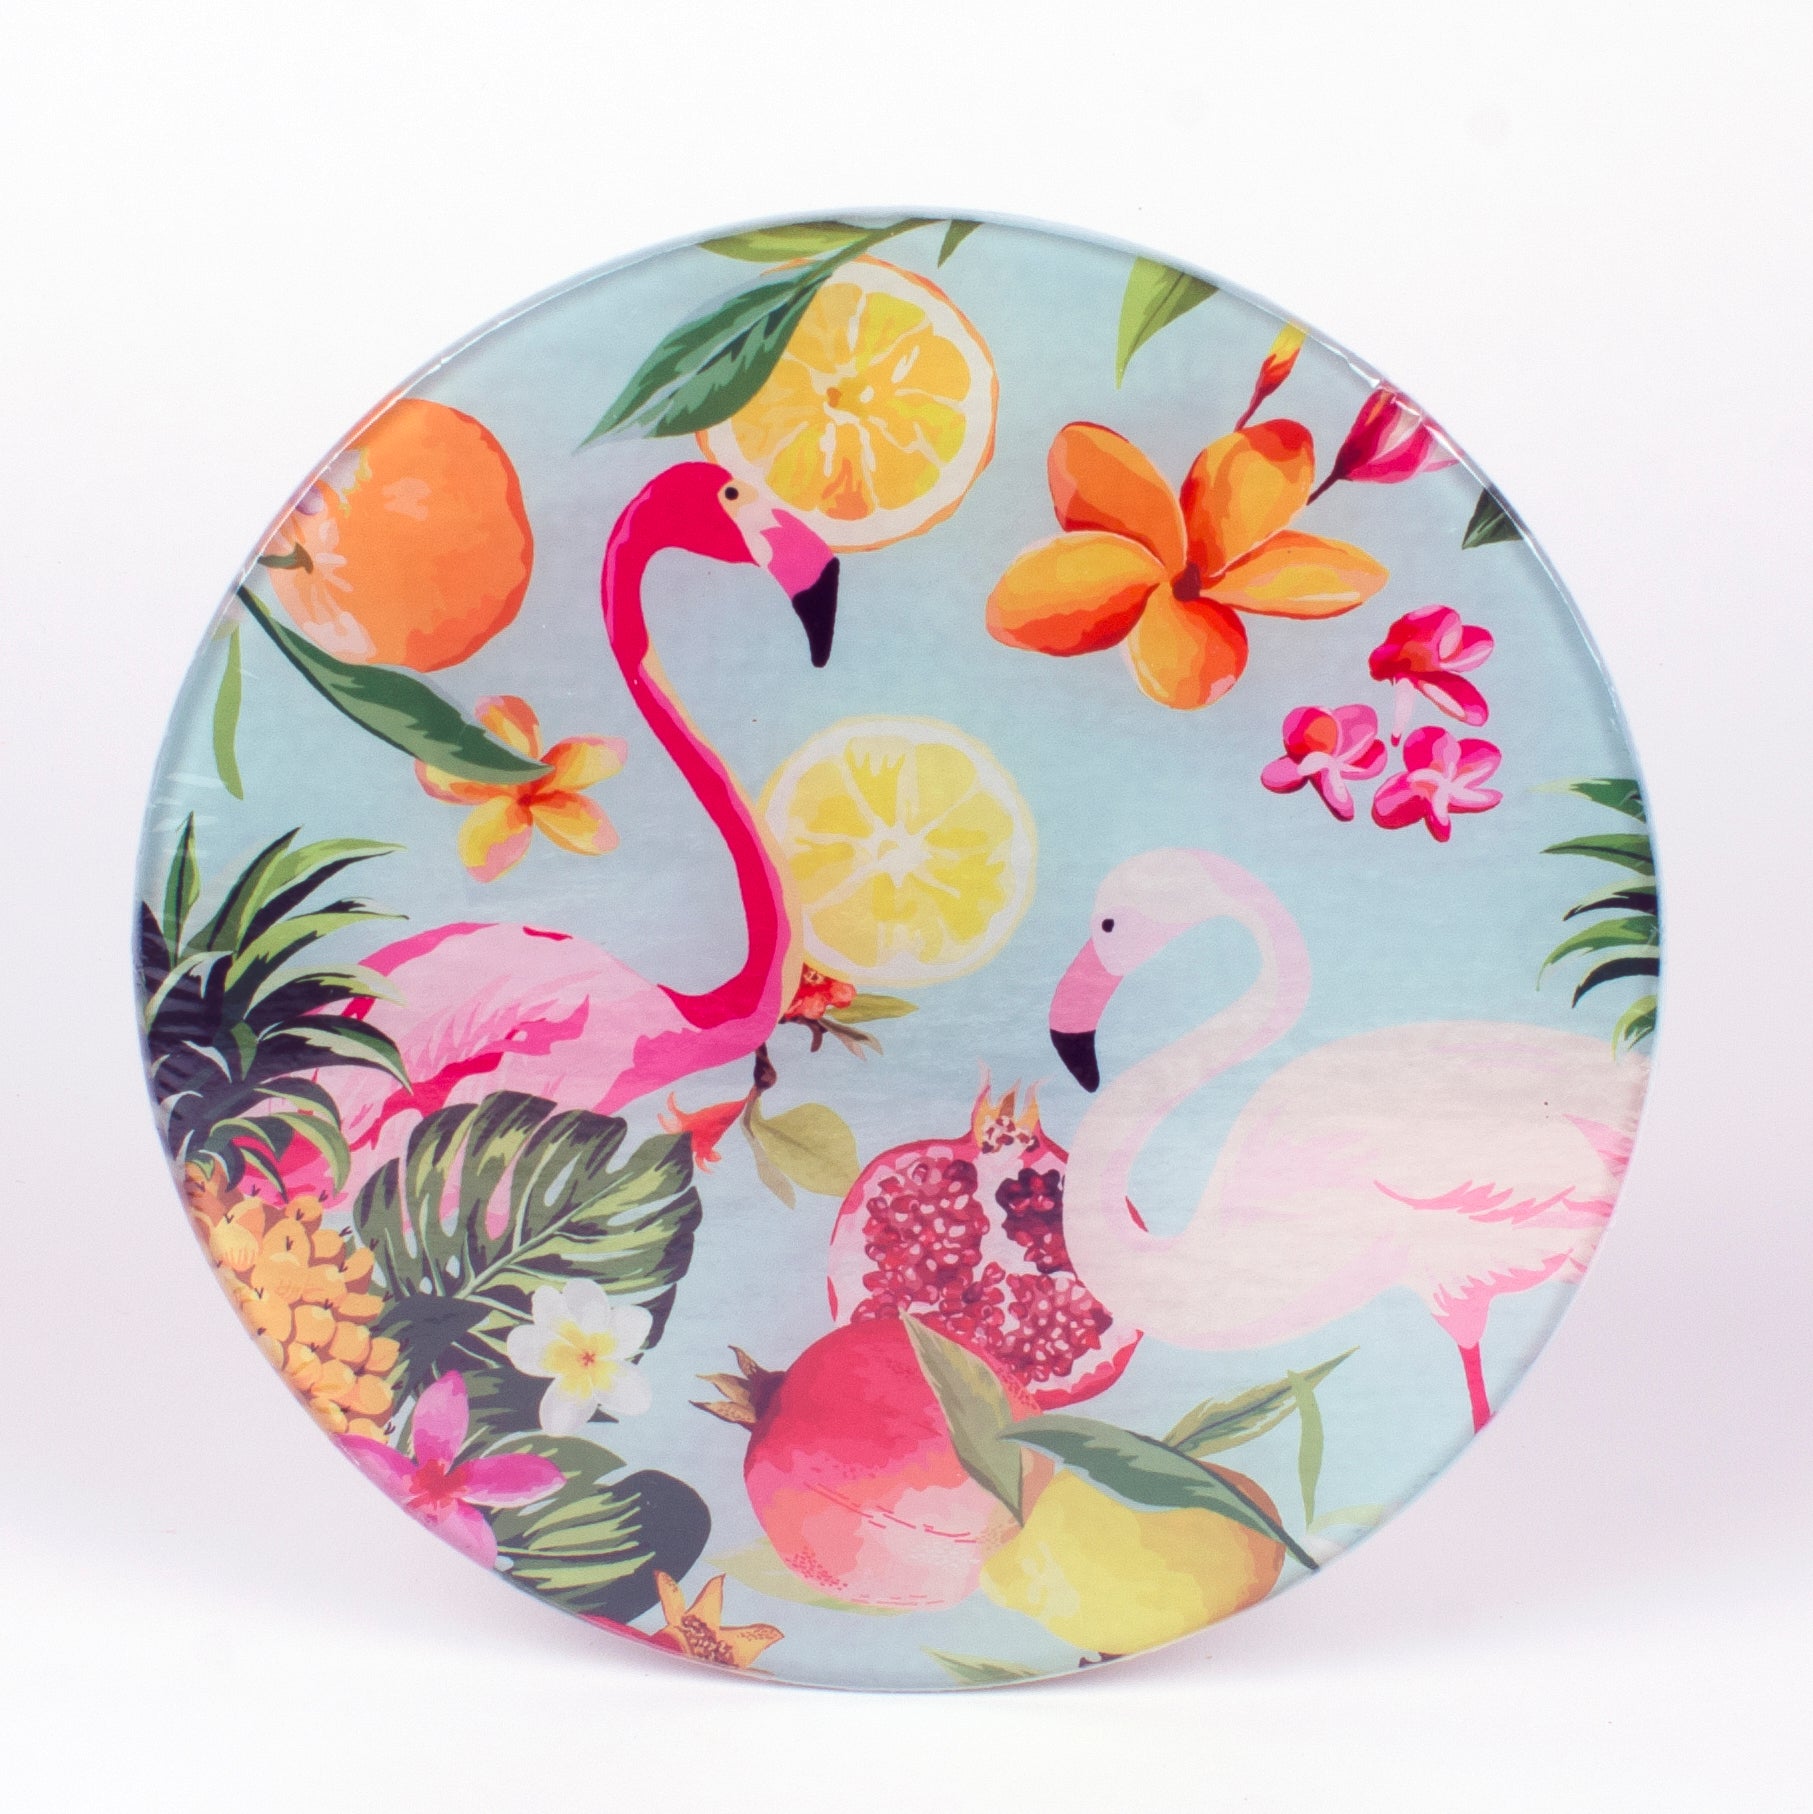 8" glass round cutting board with Flamingo and Fruit